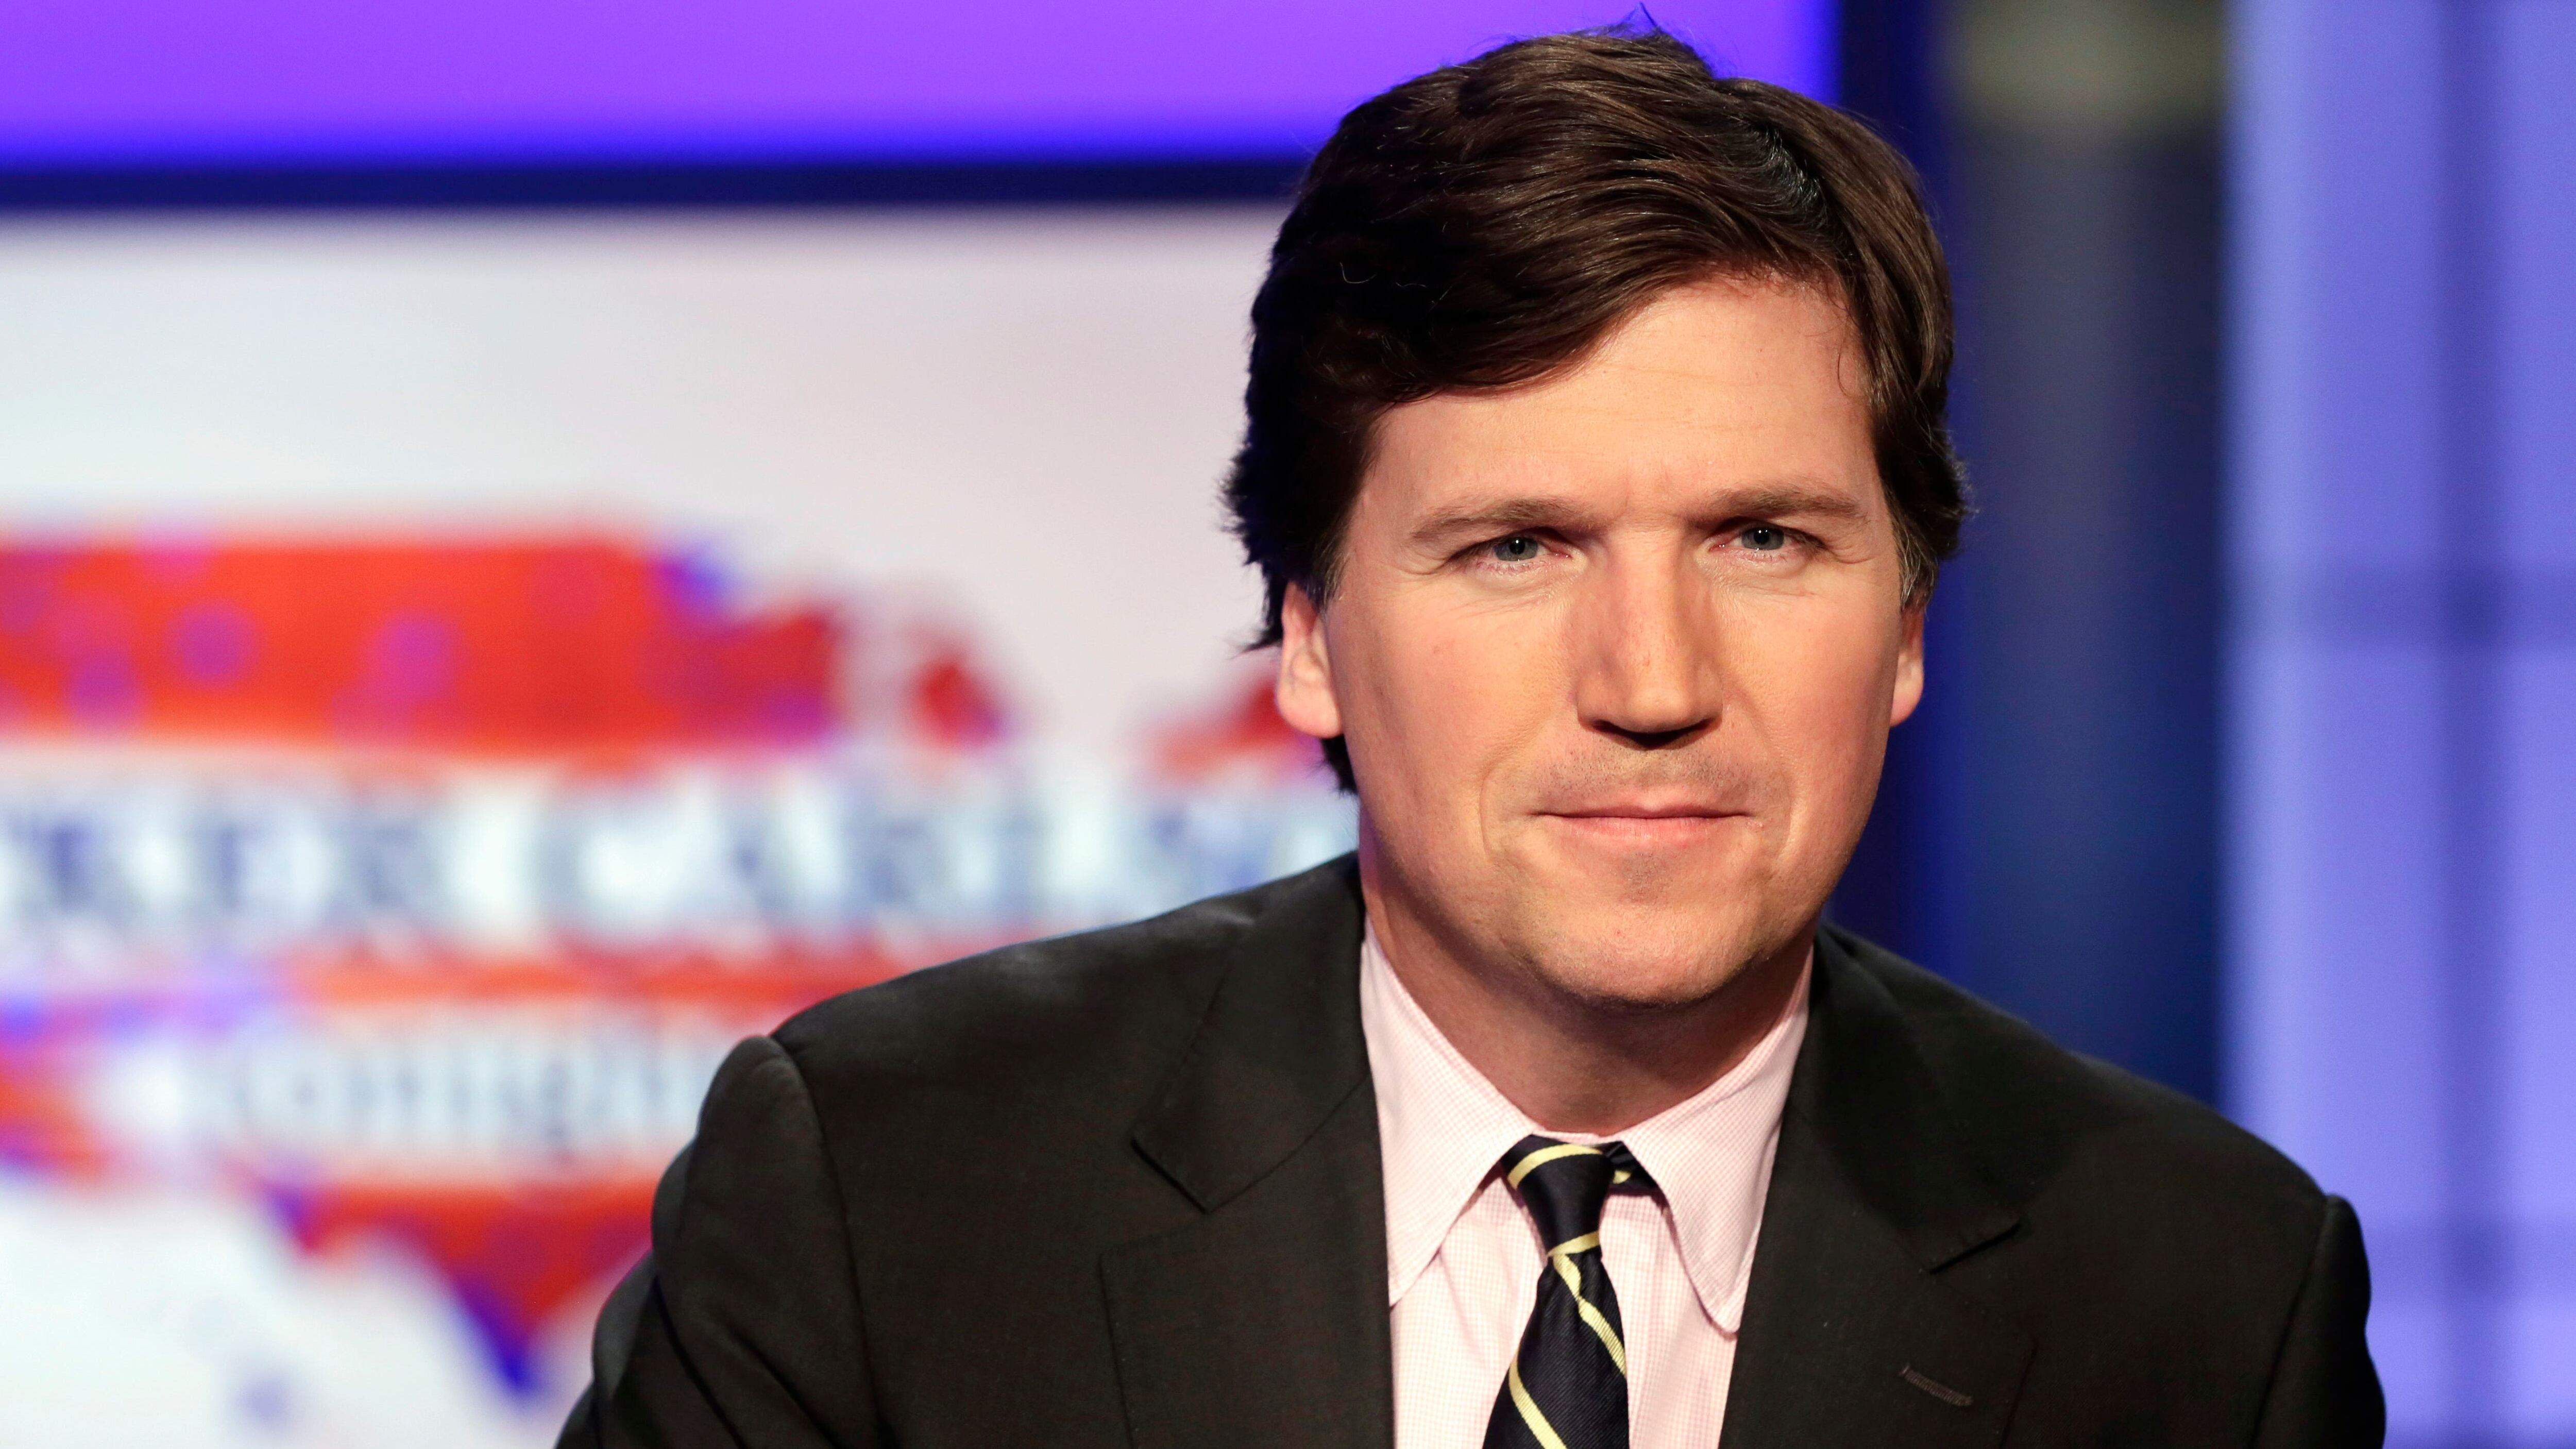 The text was one of a trove of messages from Carlson and other Fox News hosts uncovered in a defamation lawsuit.